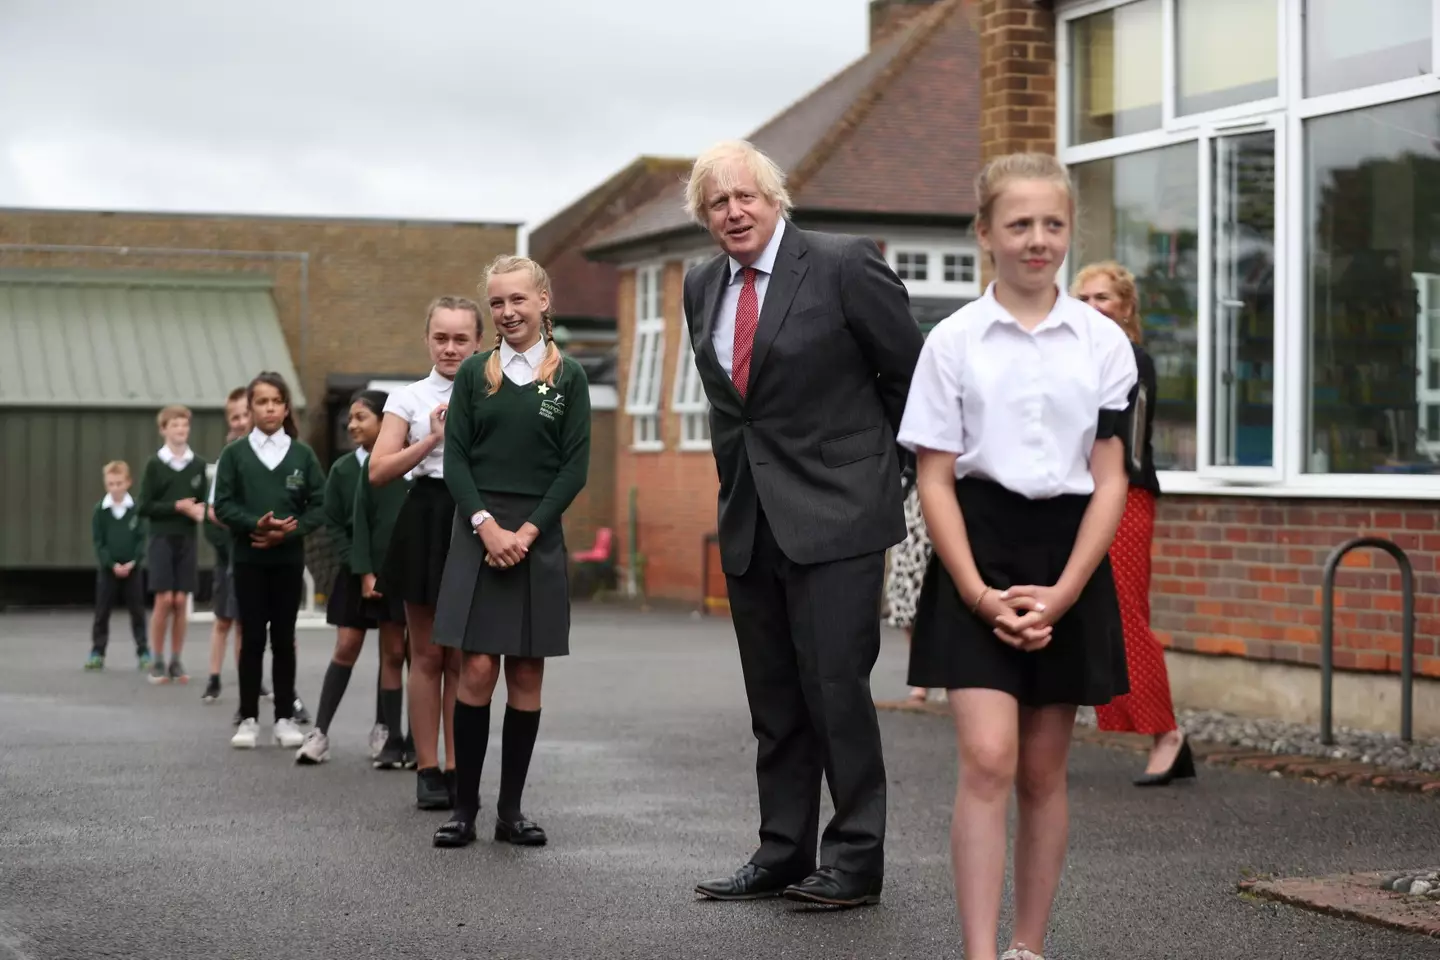 Boris Johnson visited a school in Hemel Hempstead on the same day his alleged birthday party took place (